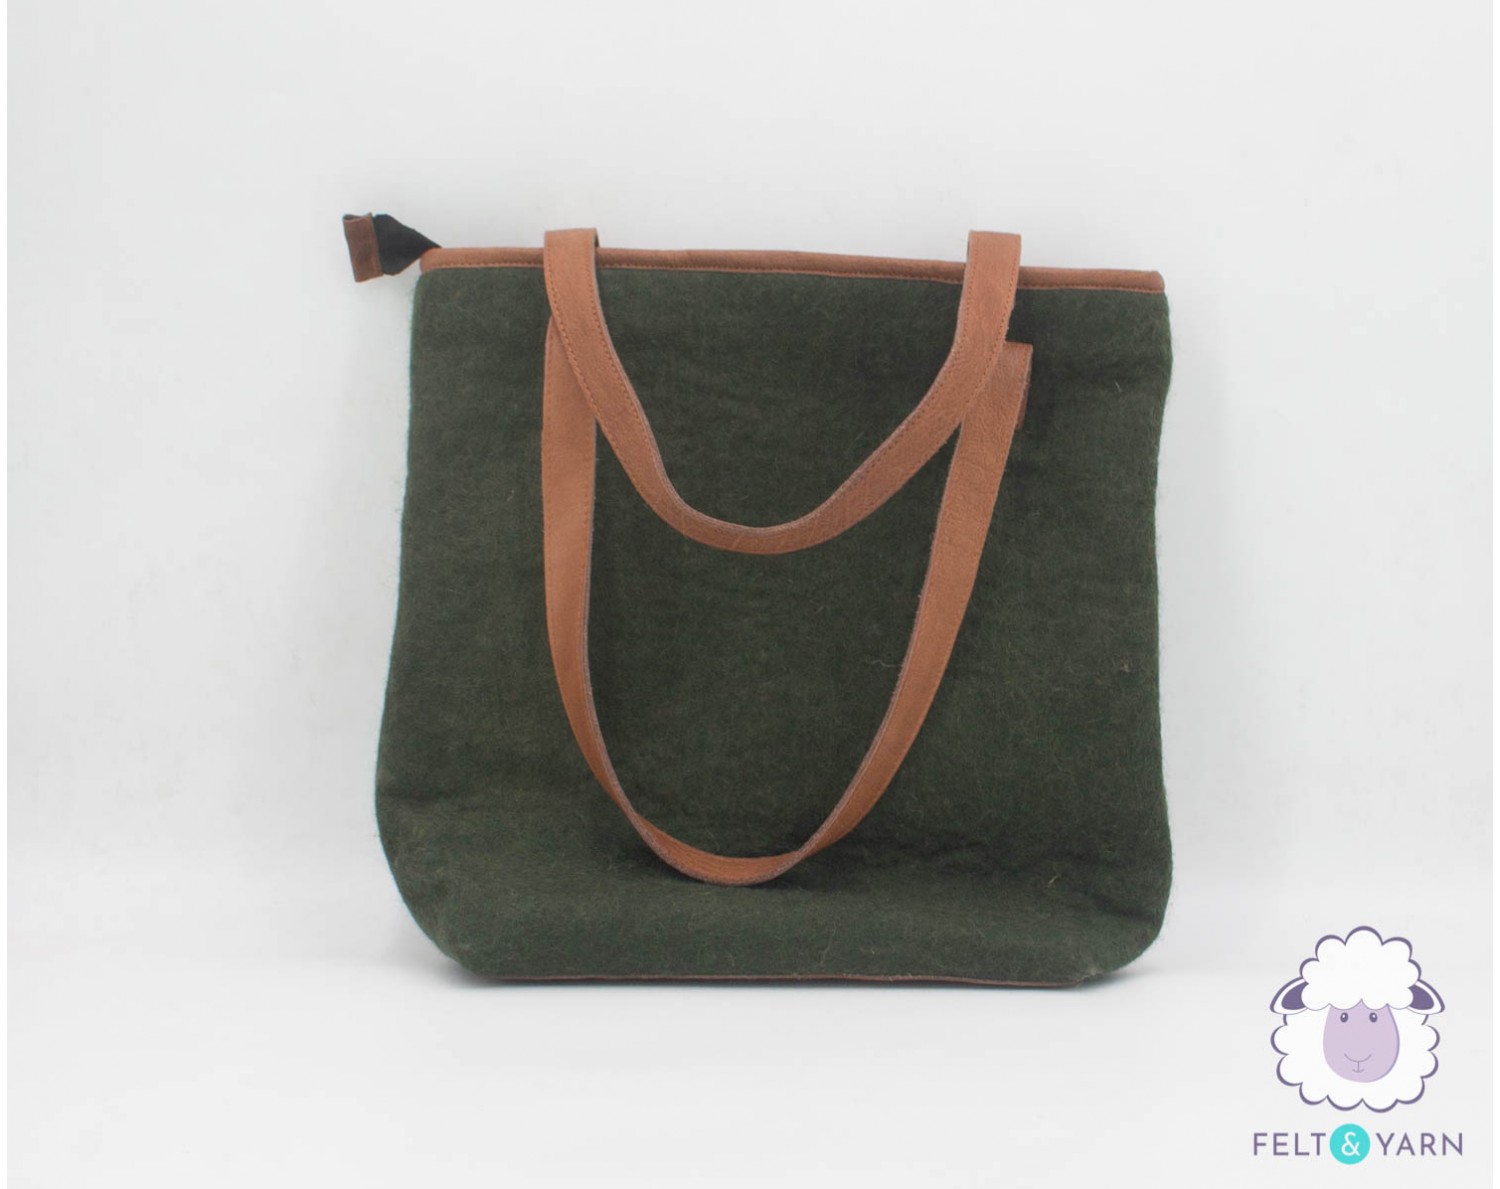 Seaweed Green Felt Tote Bag with Leather and Zipper